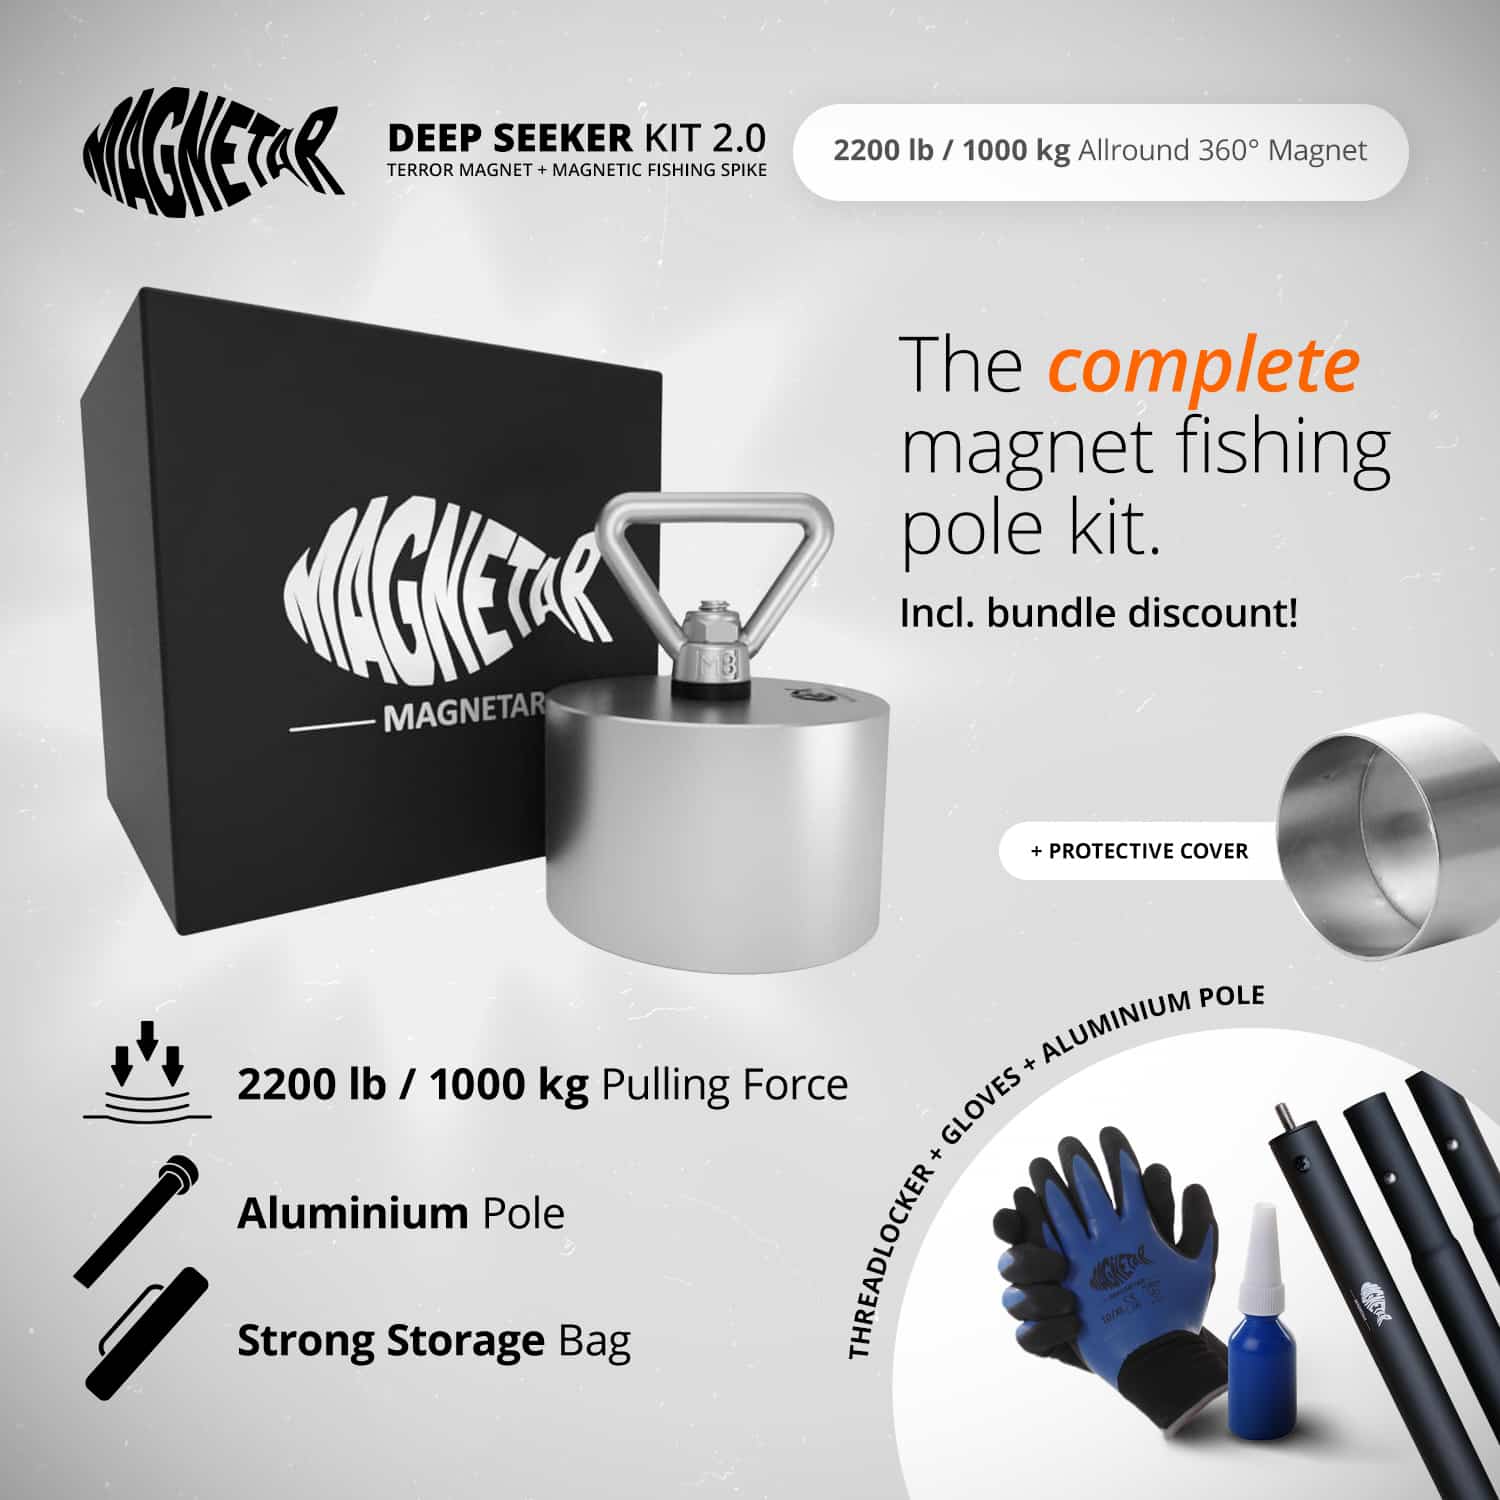 Fishing Spike package 2.0 - 2200 lb / 1000 kg - Terror - Allround